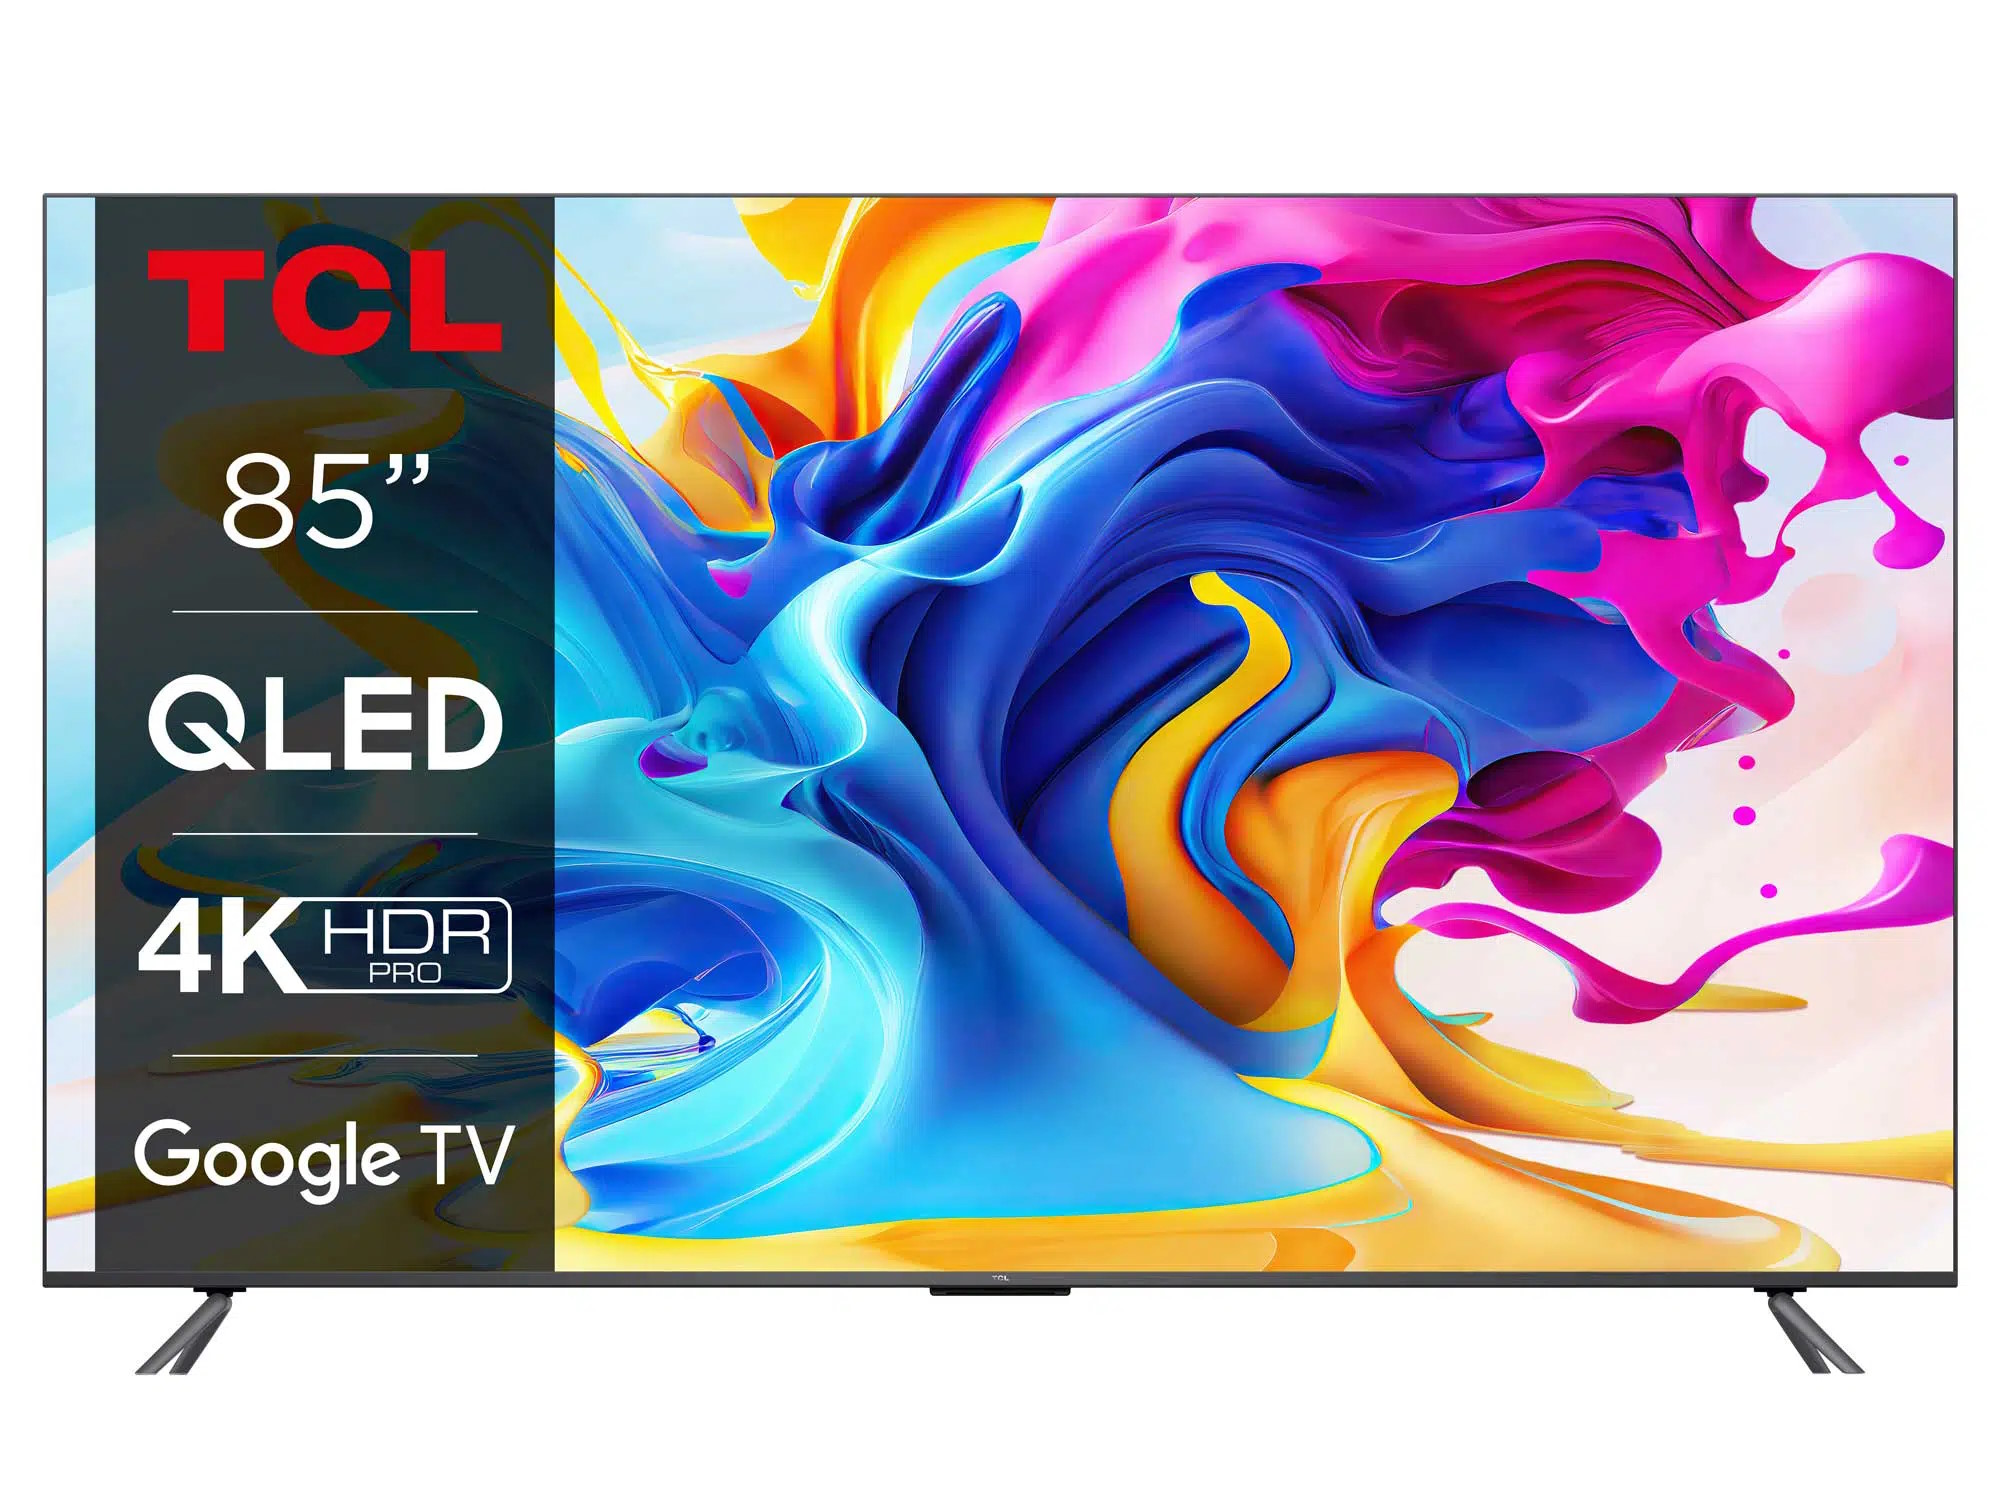 TCL SMART TV 85 QLED UHD 4K ANDROID TV NERO